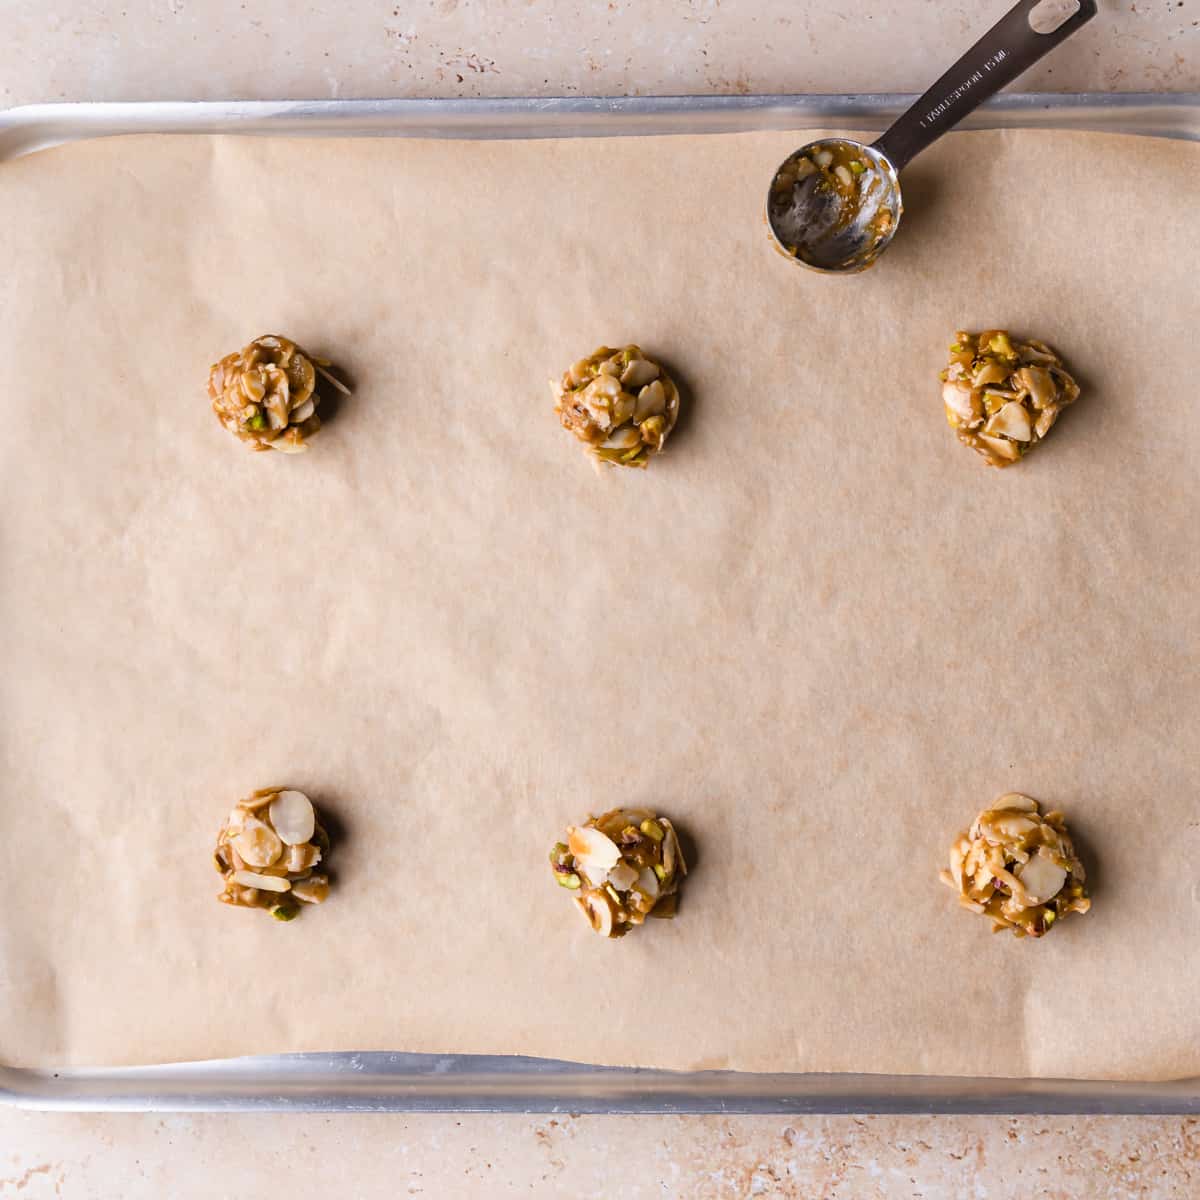 baking sheet lined with baking parchment and small balls of almond florentines mixture and measuring spoon on the baking tray.